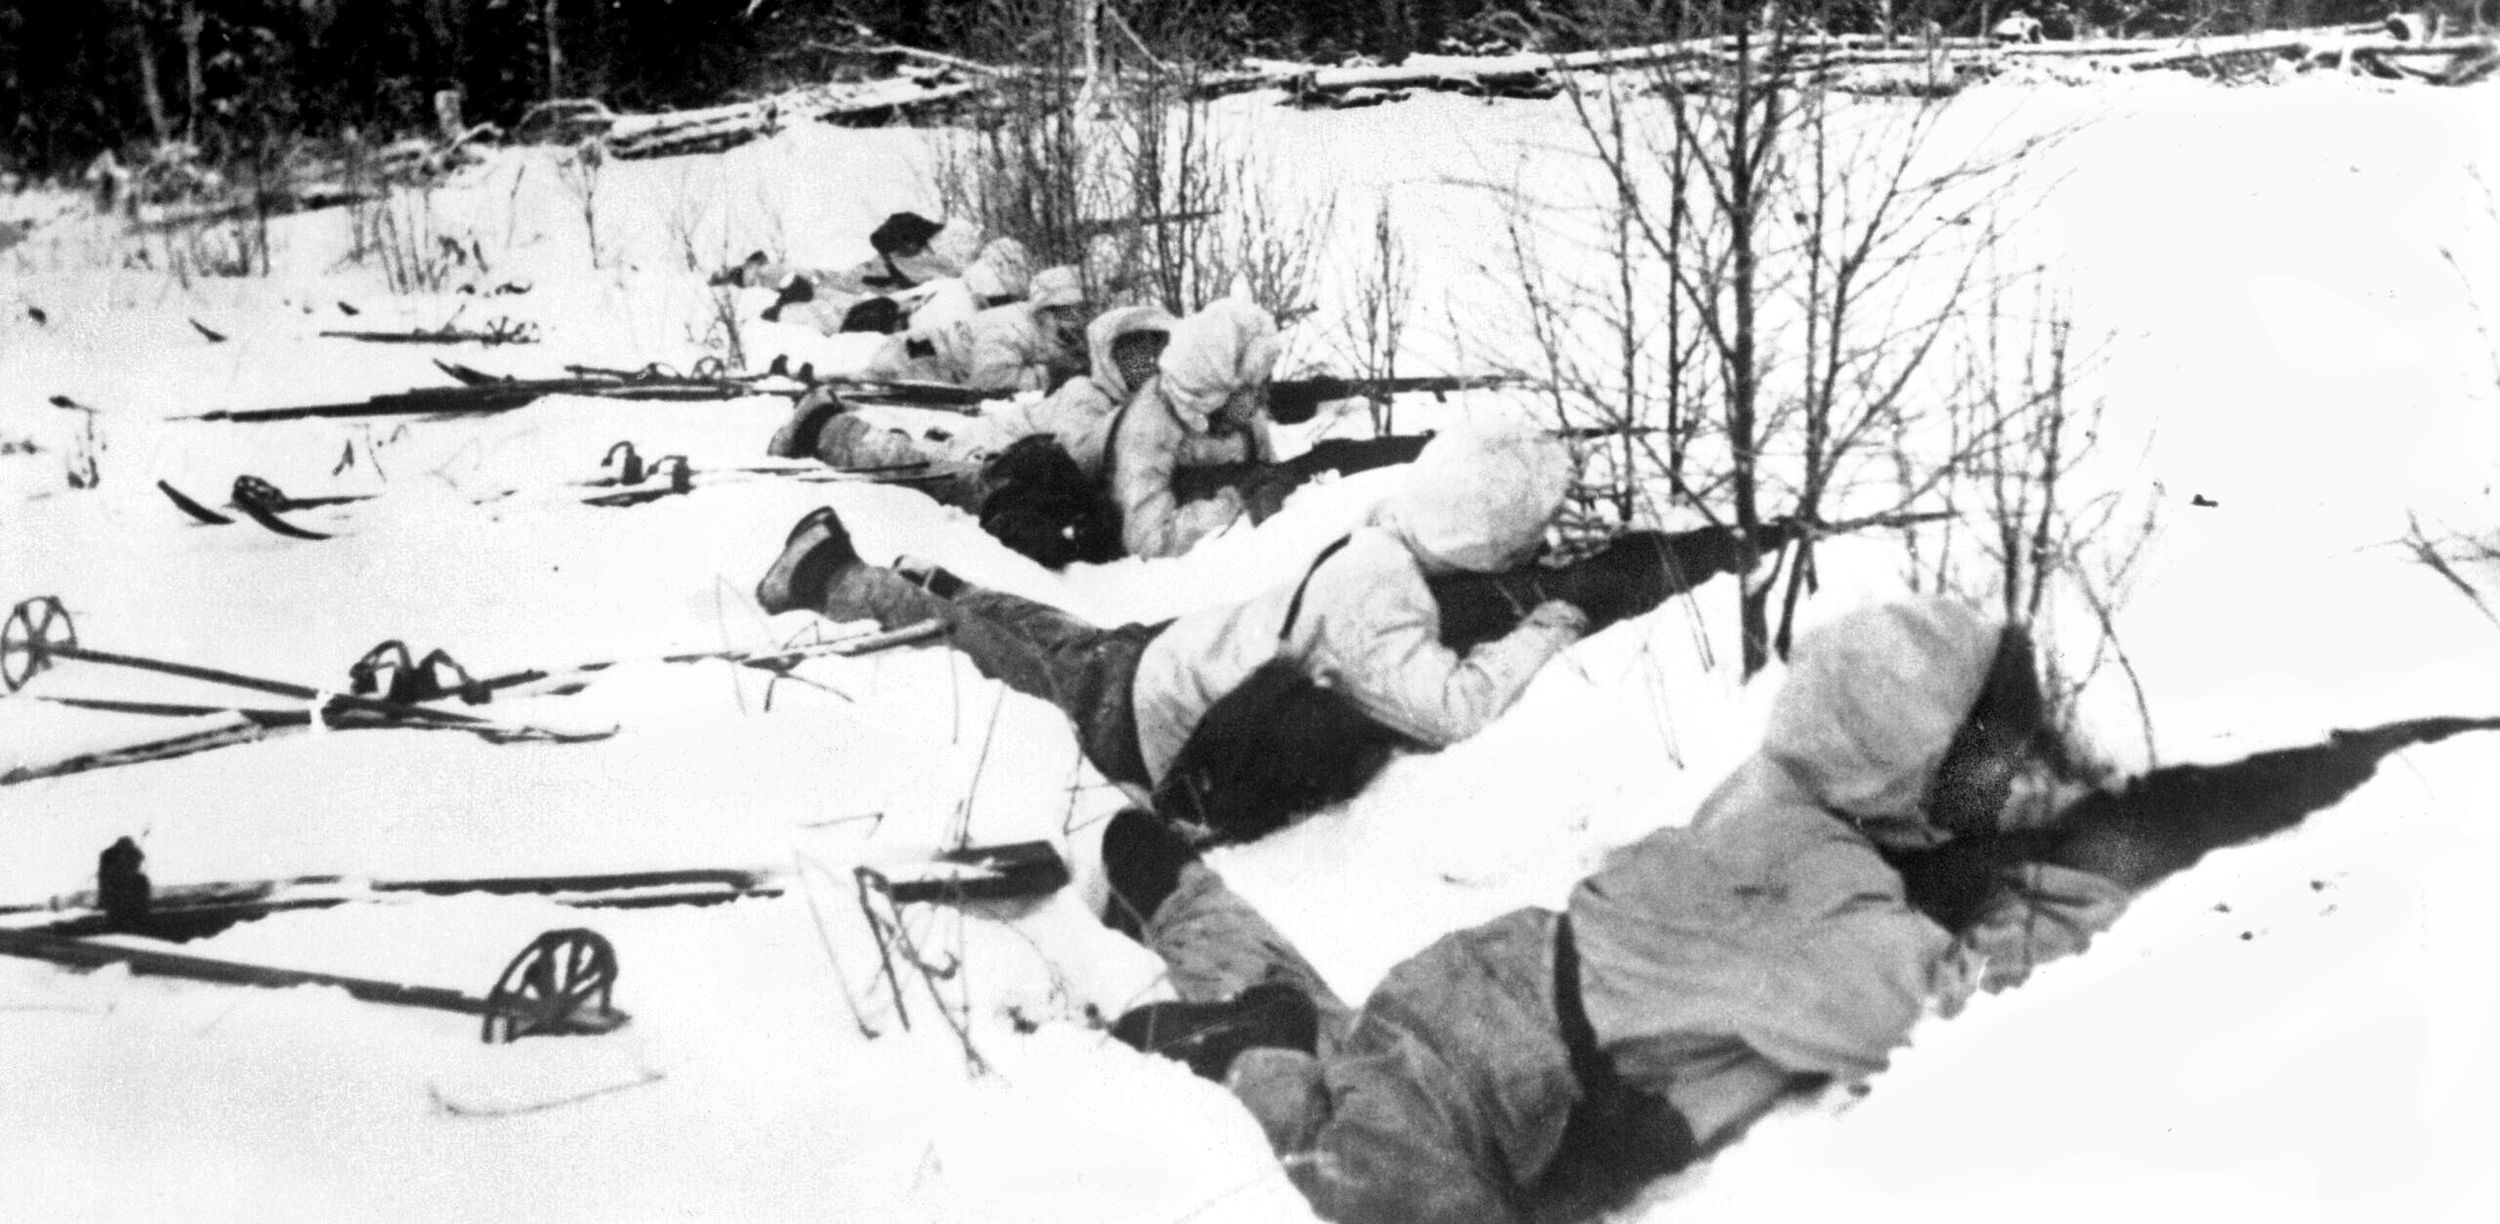 Finnish ski troops took a heavy toll on the Soviet infantry units sent to fight in Finland. Employing speed and remarkable marksmanship, they were feared and respected. In this image a group of Finnish ski troops takes aim during the Winter War.